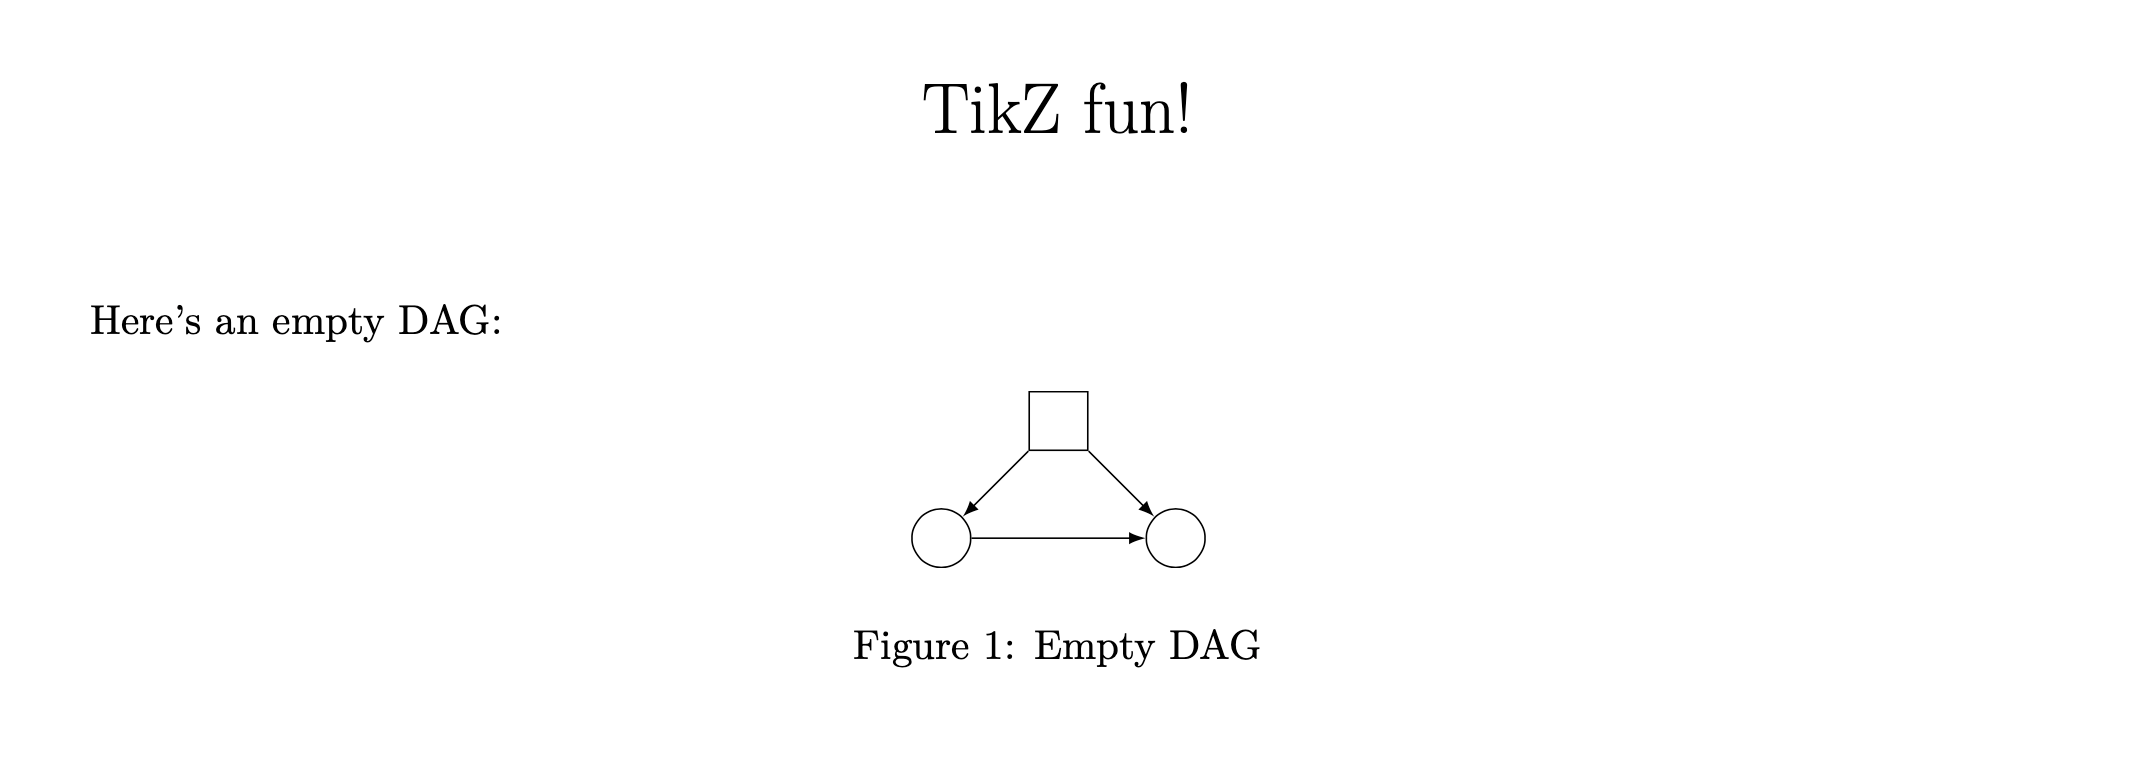 How to automatically convert TikZ images to SVG (with